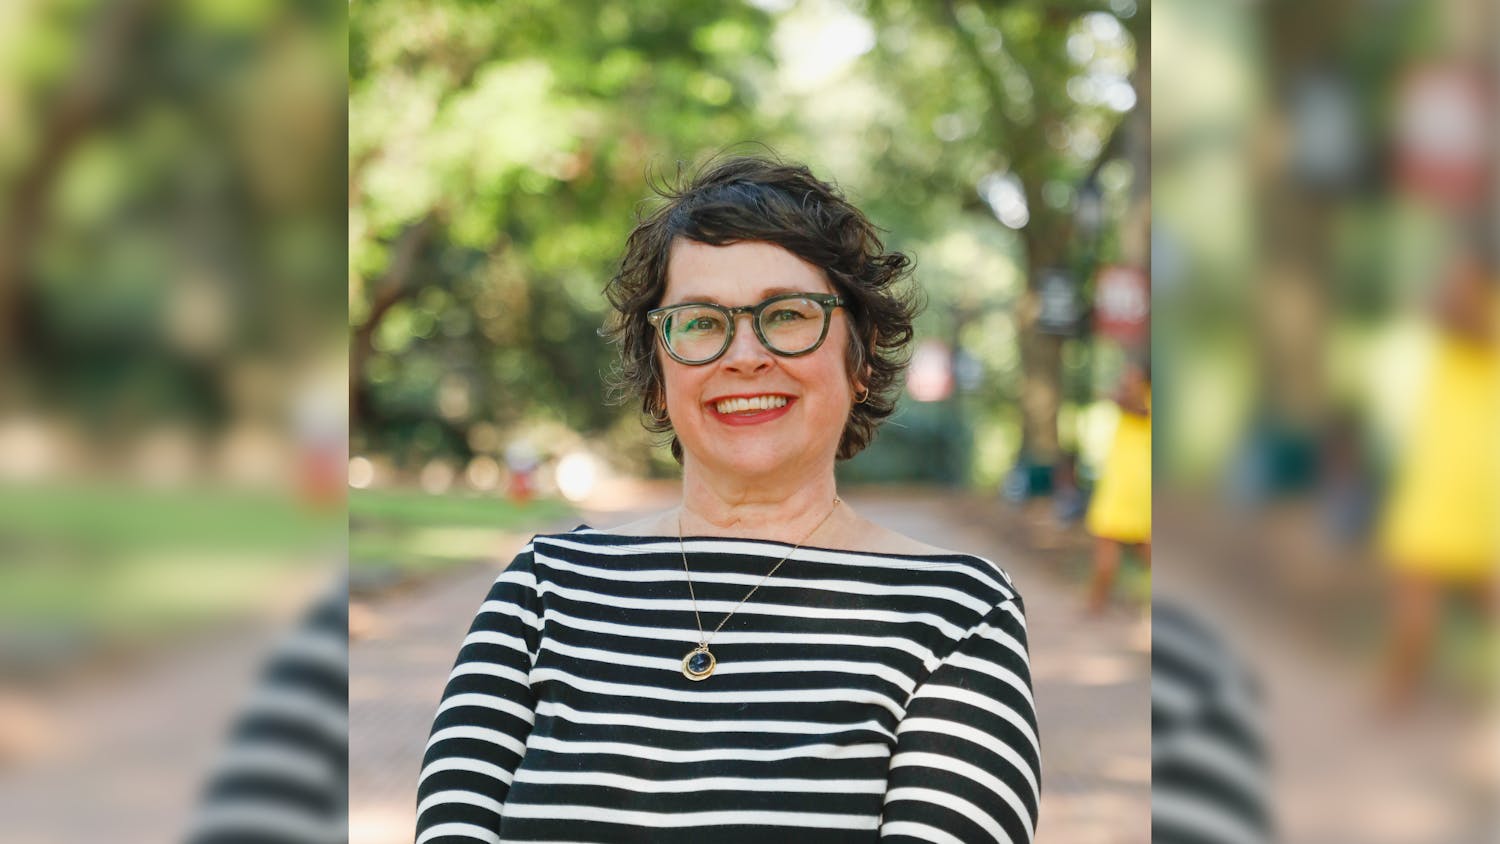 A portrait of Rachel Brasell, the new basic needs coordinator at the University of South Carolina. Brasell plans to address housing, food and financial needs for students.